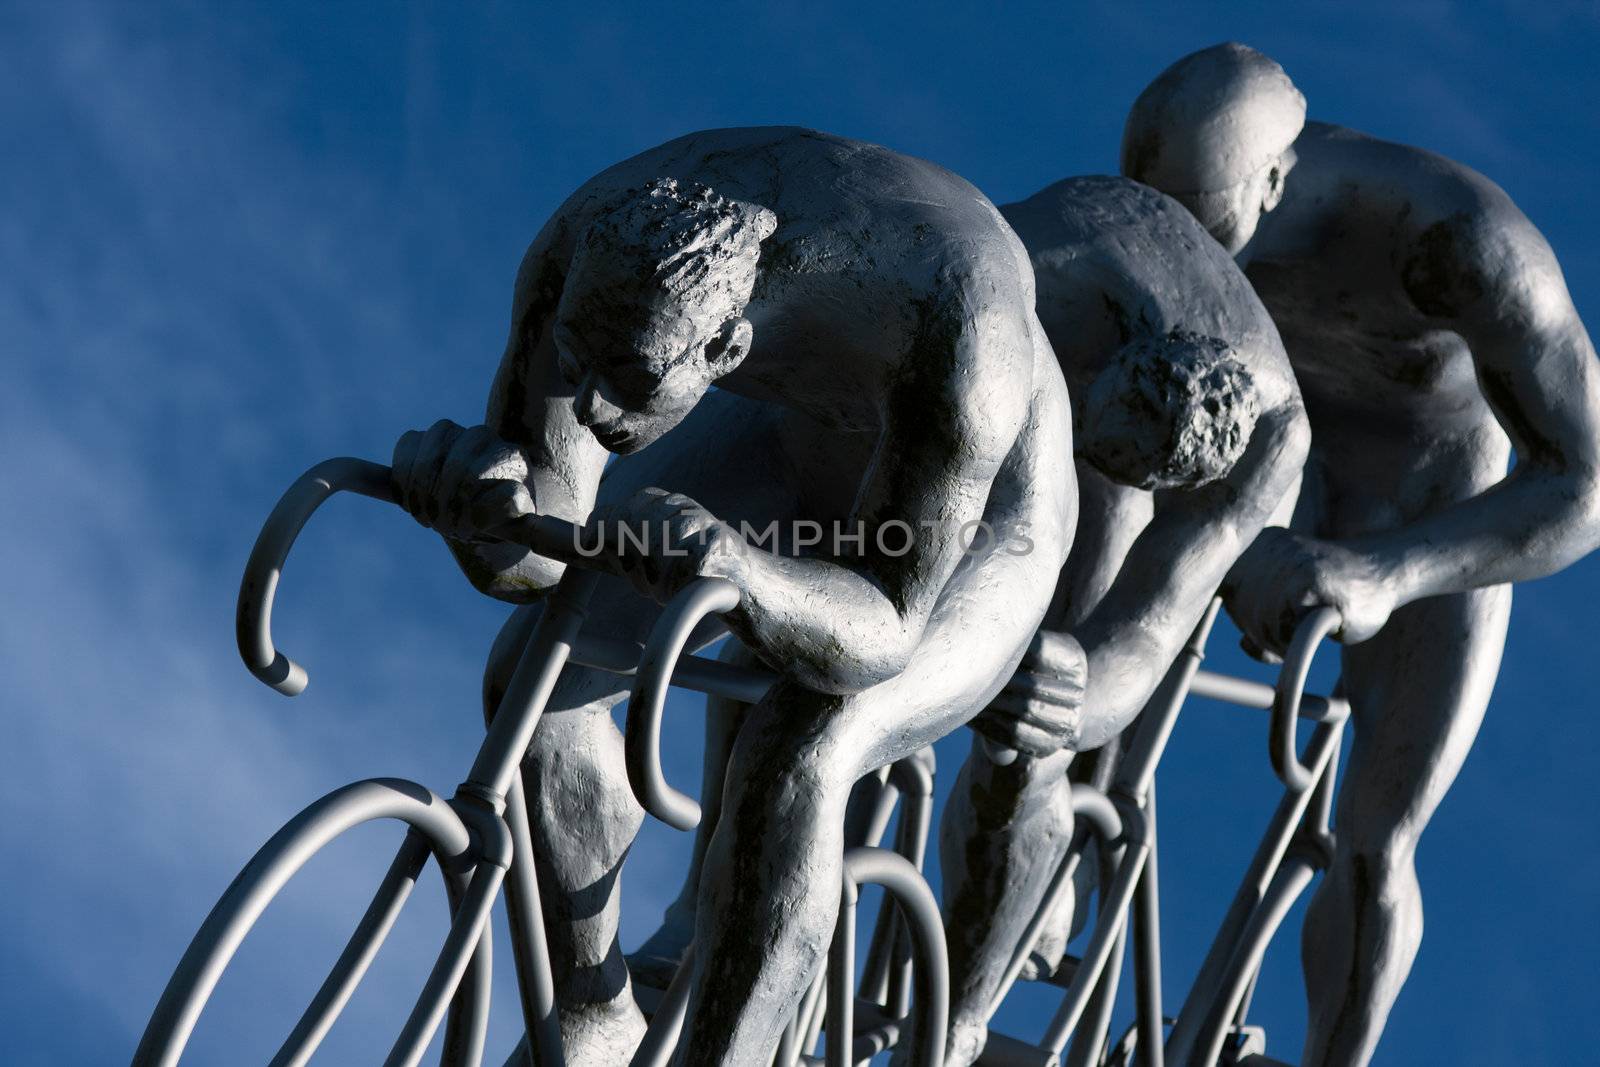 Three cyclists rides  in a downhill, part sculpture